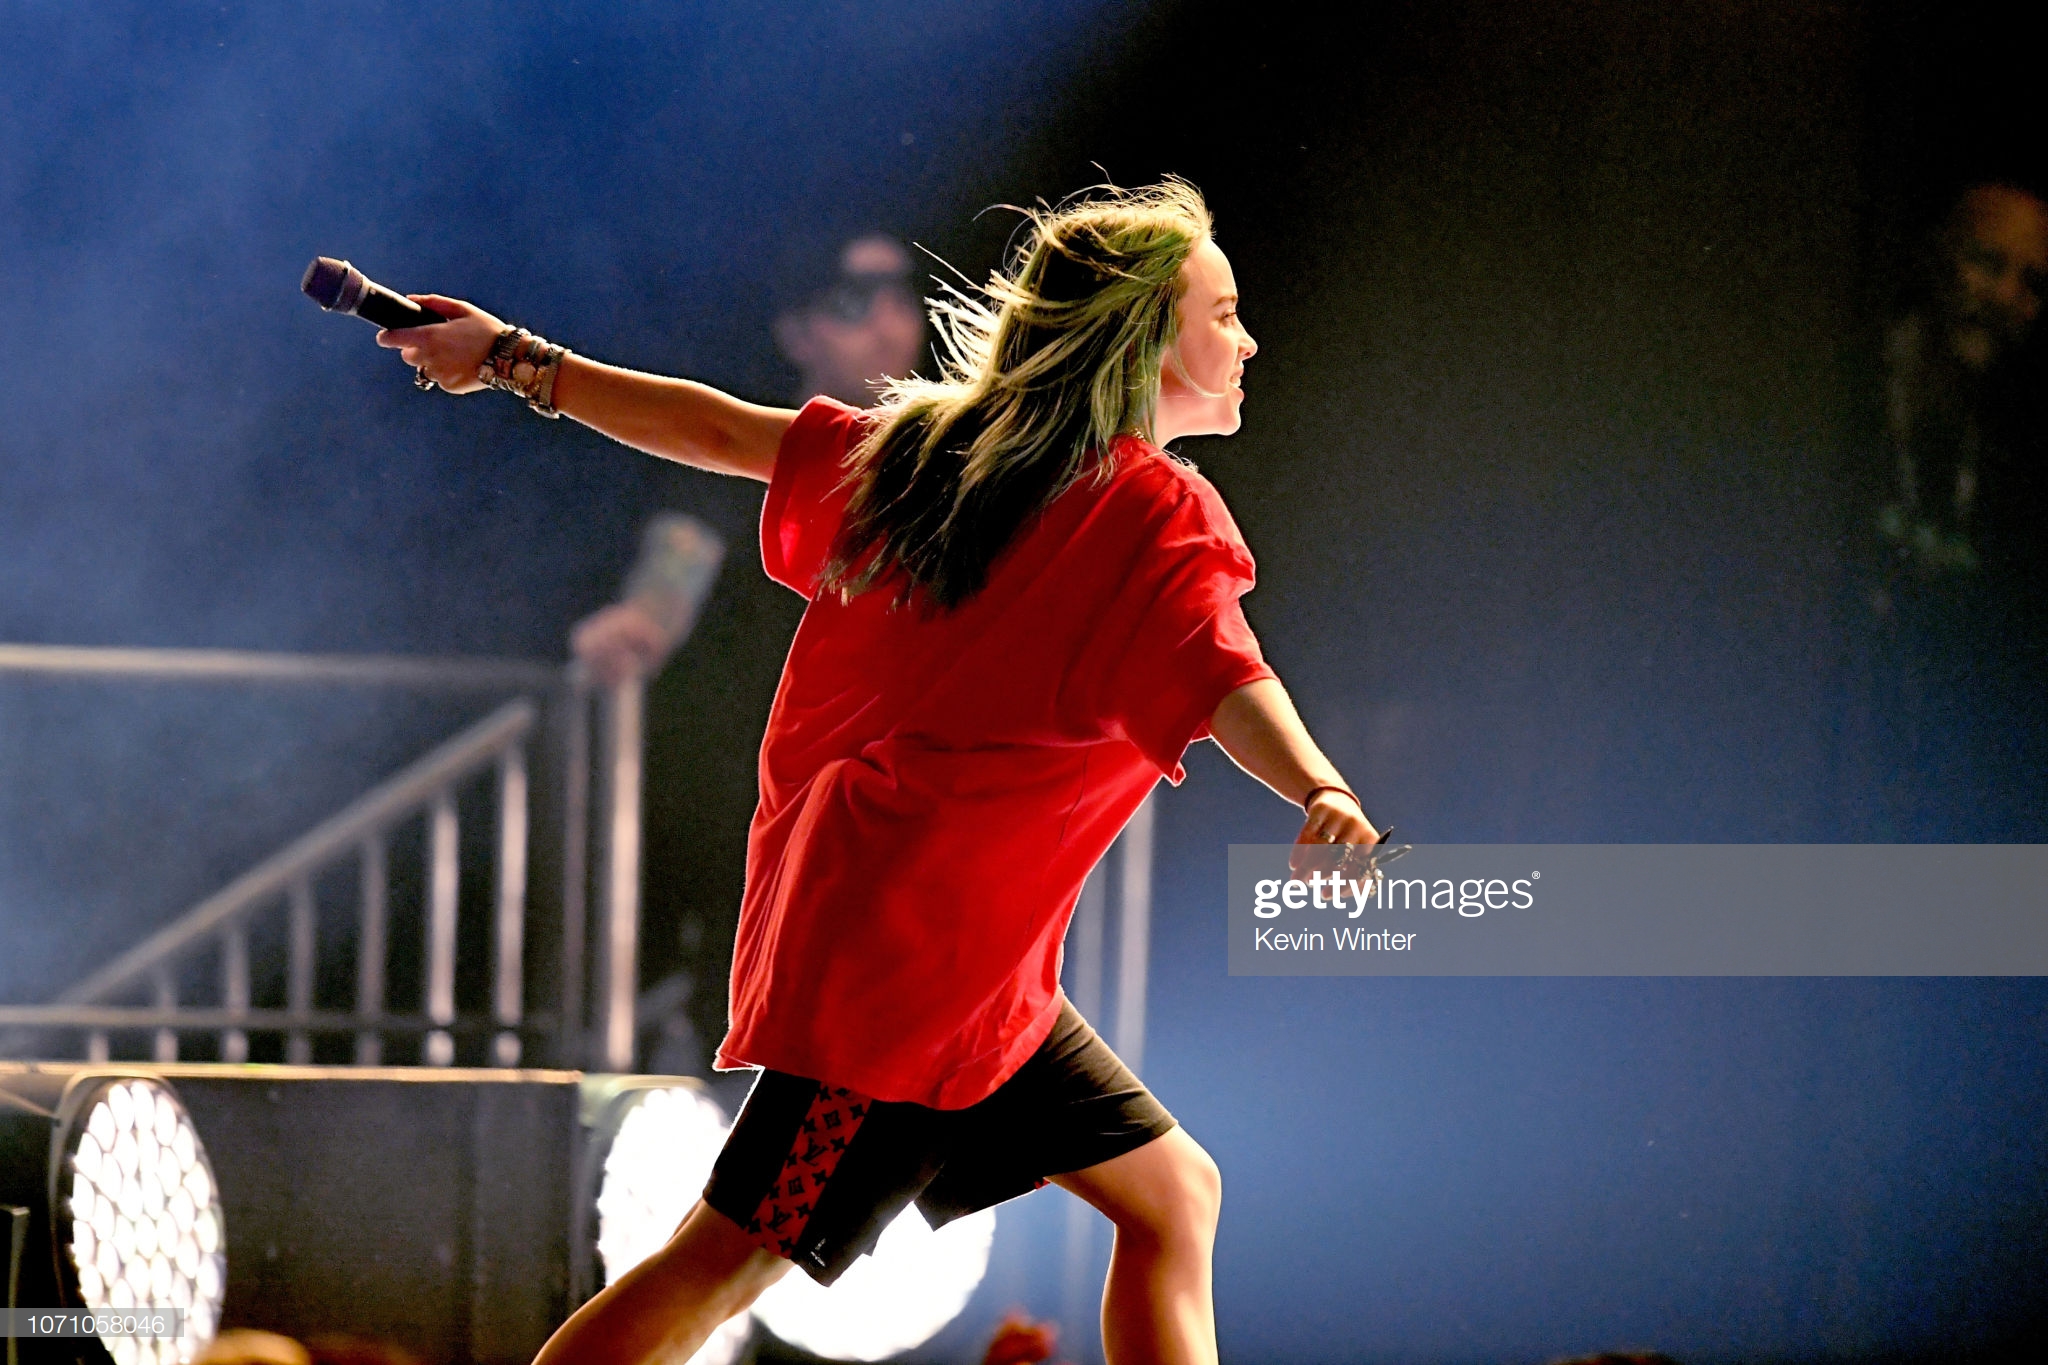 gettyimages-1071058046-2048x2048.jpg